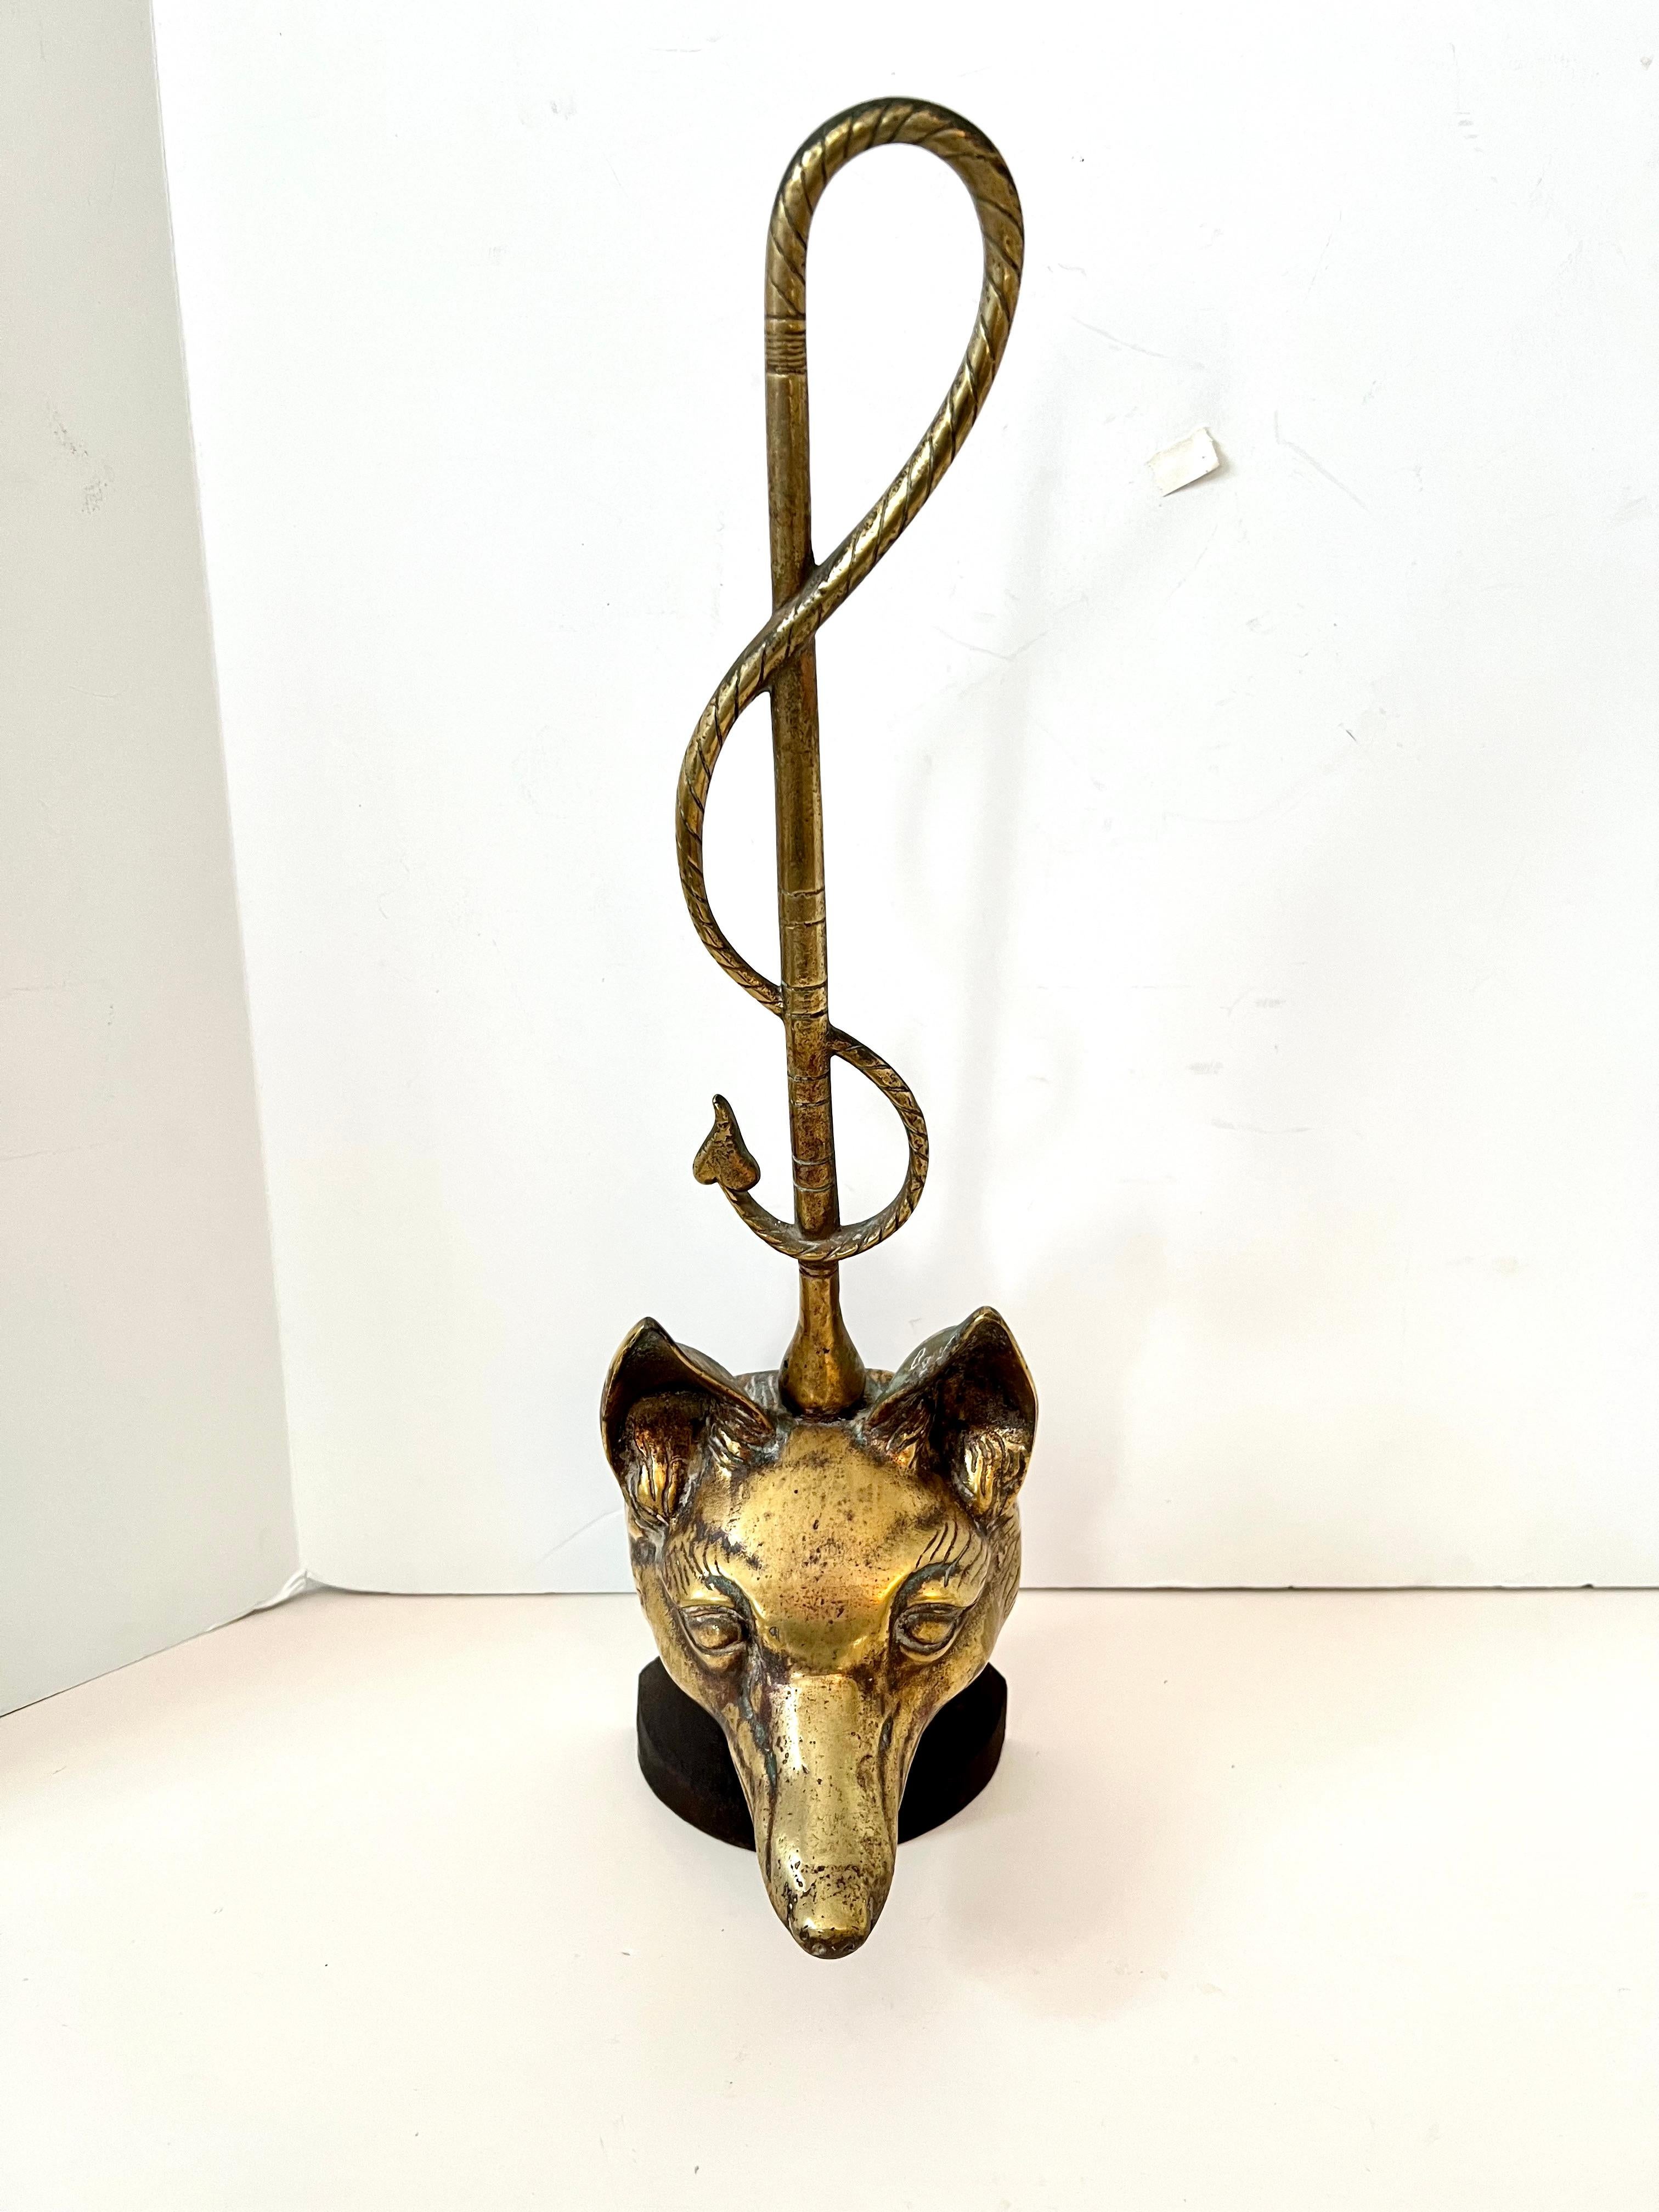 A beautiful nod to a classic English Figure - the Fox.  The fox door stop is made of brass and has, as a handle a lovely 'riding crop'.

Easy to pick up with out having to bend over too far - the piece is weighted with an iron base and back.   The